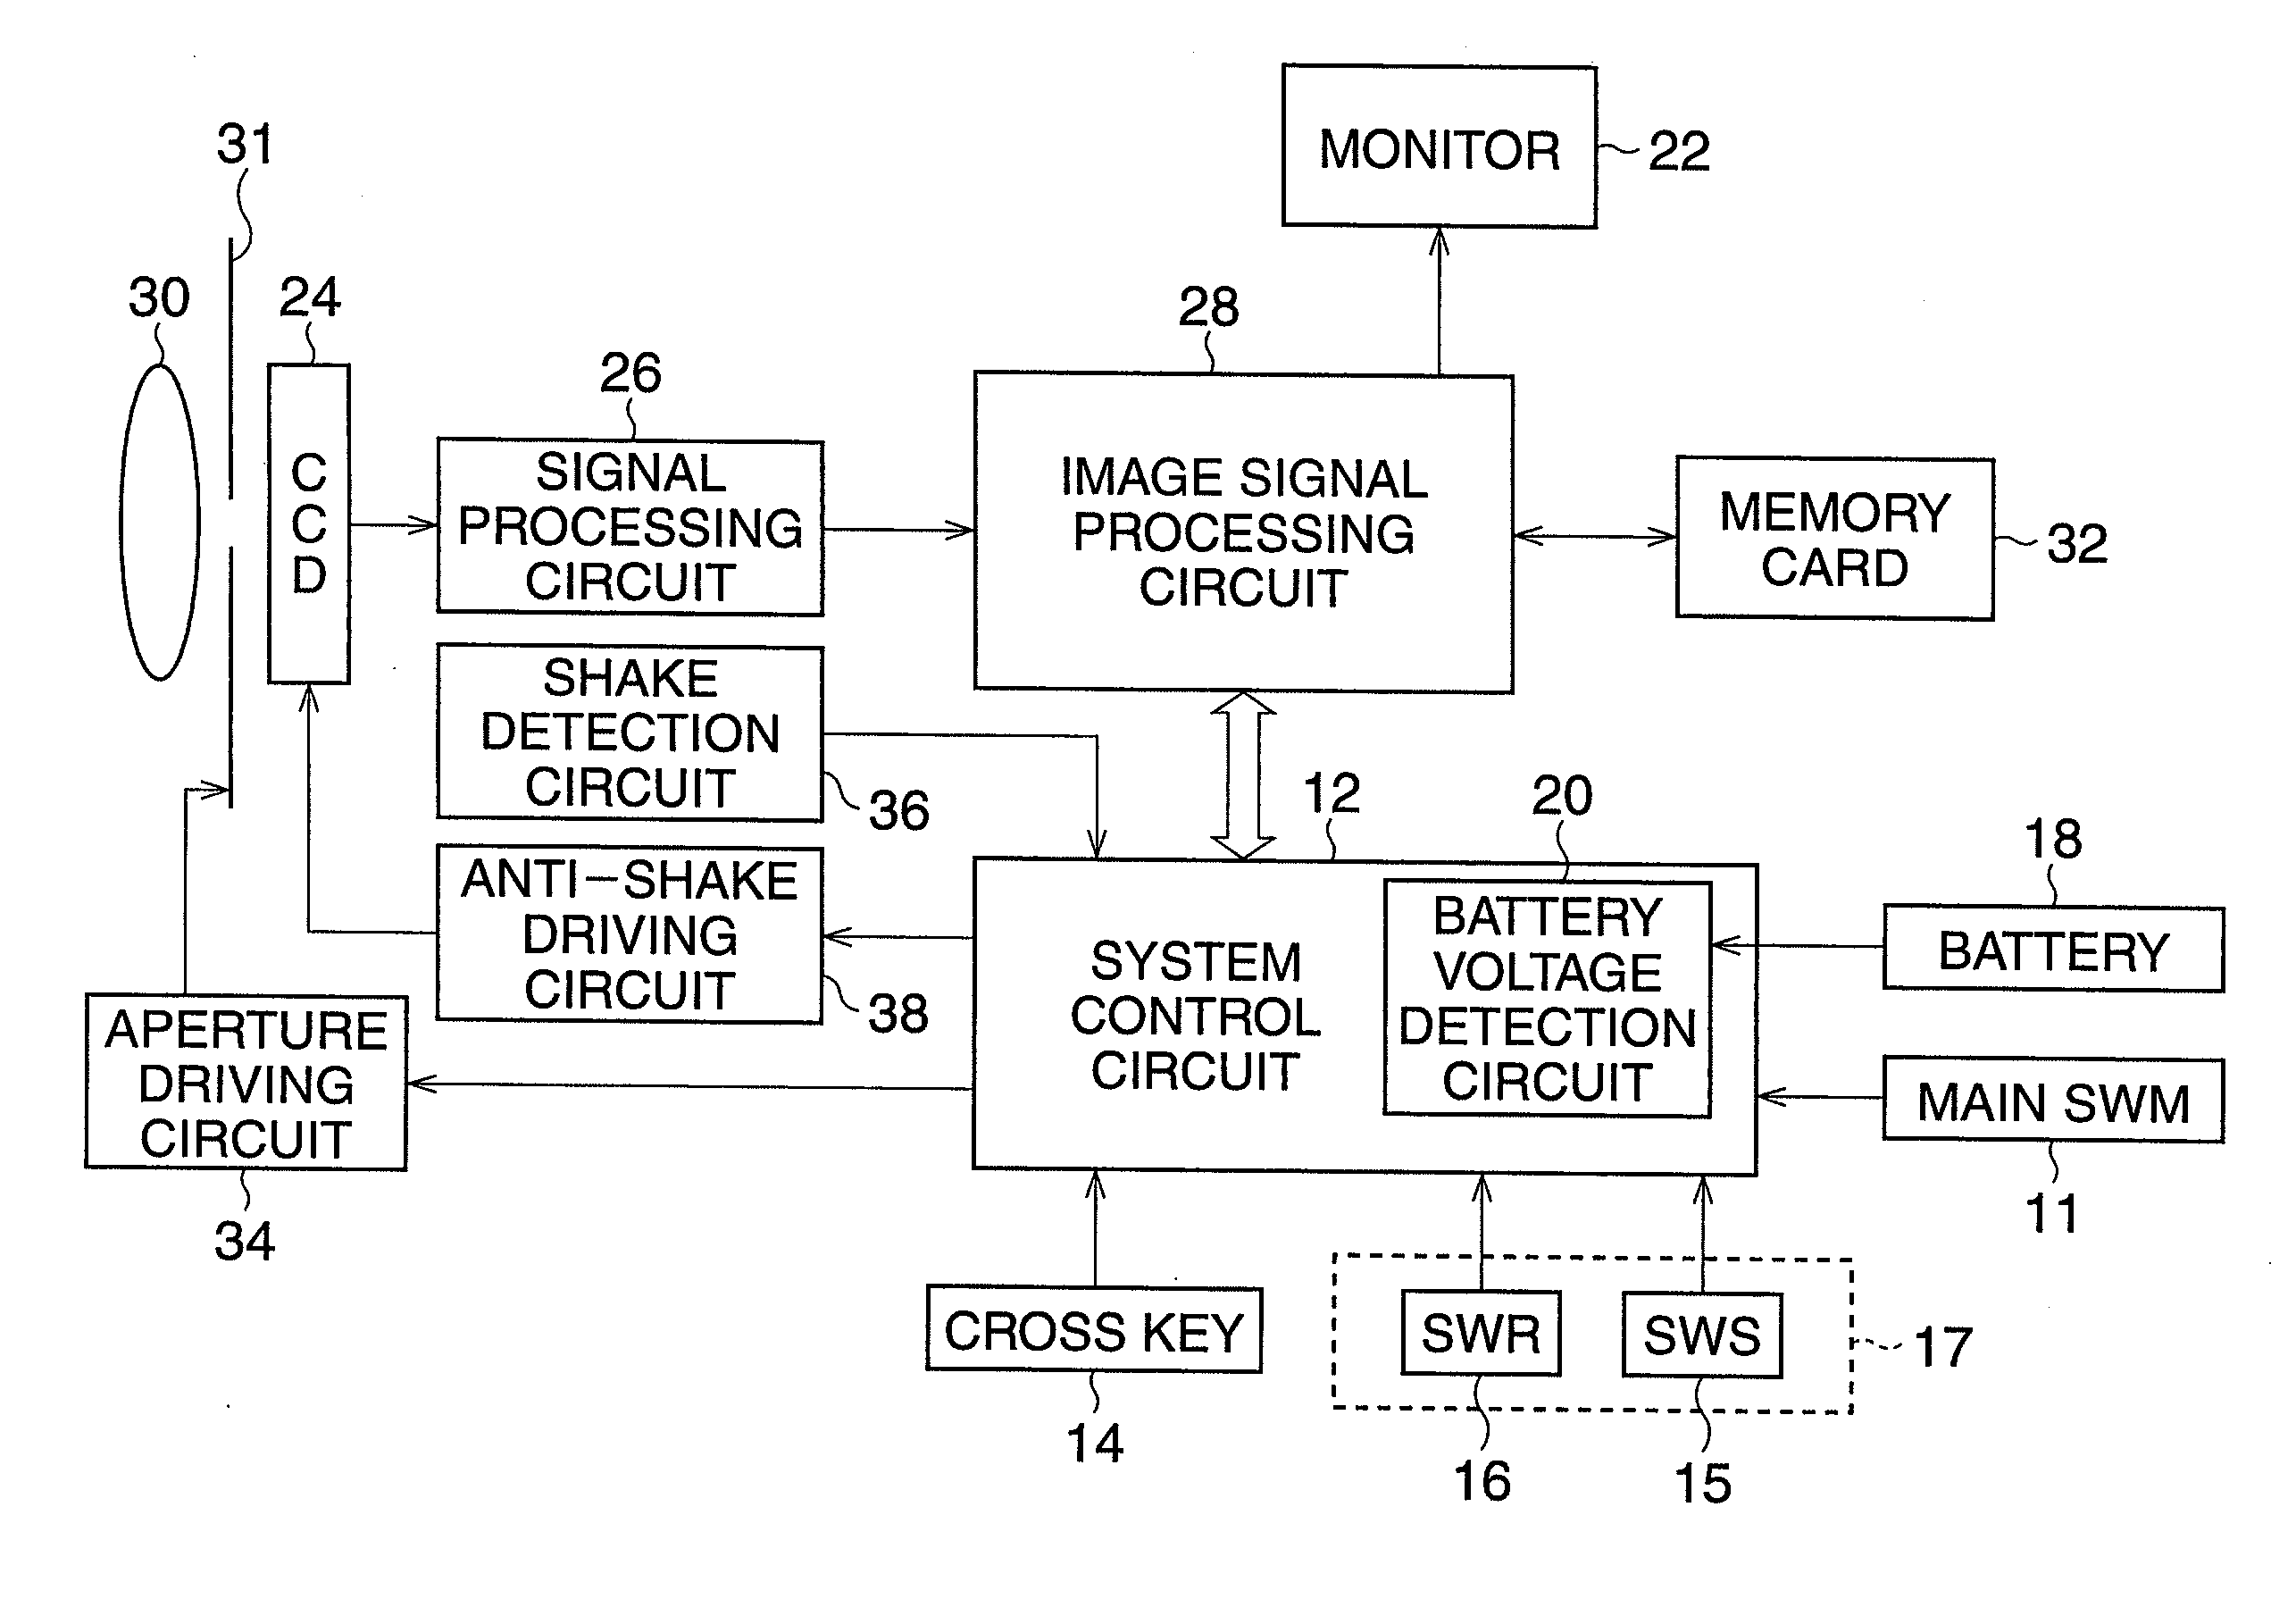 Photographic device with Anti-shake function